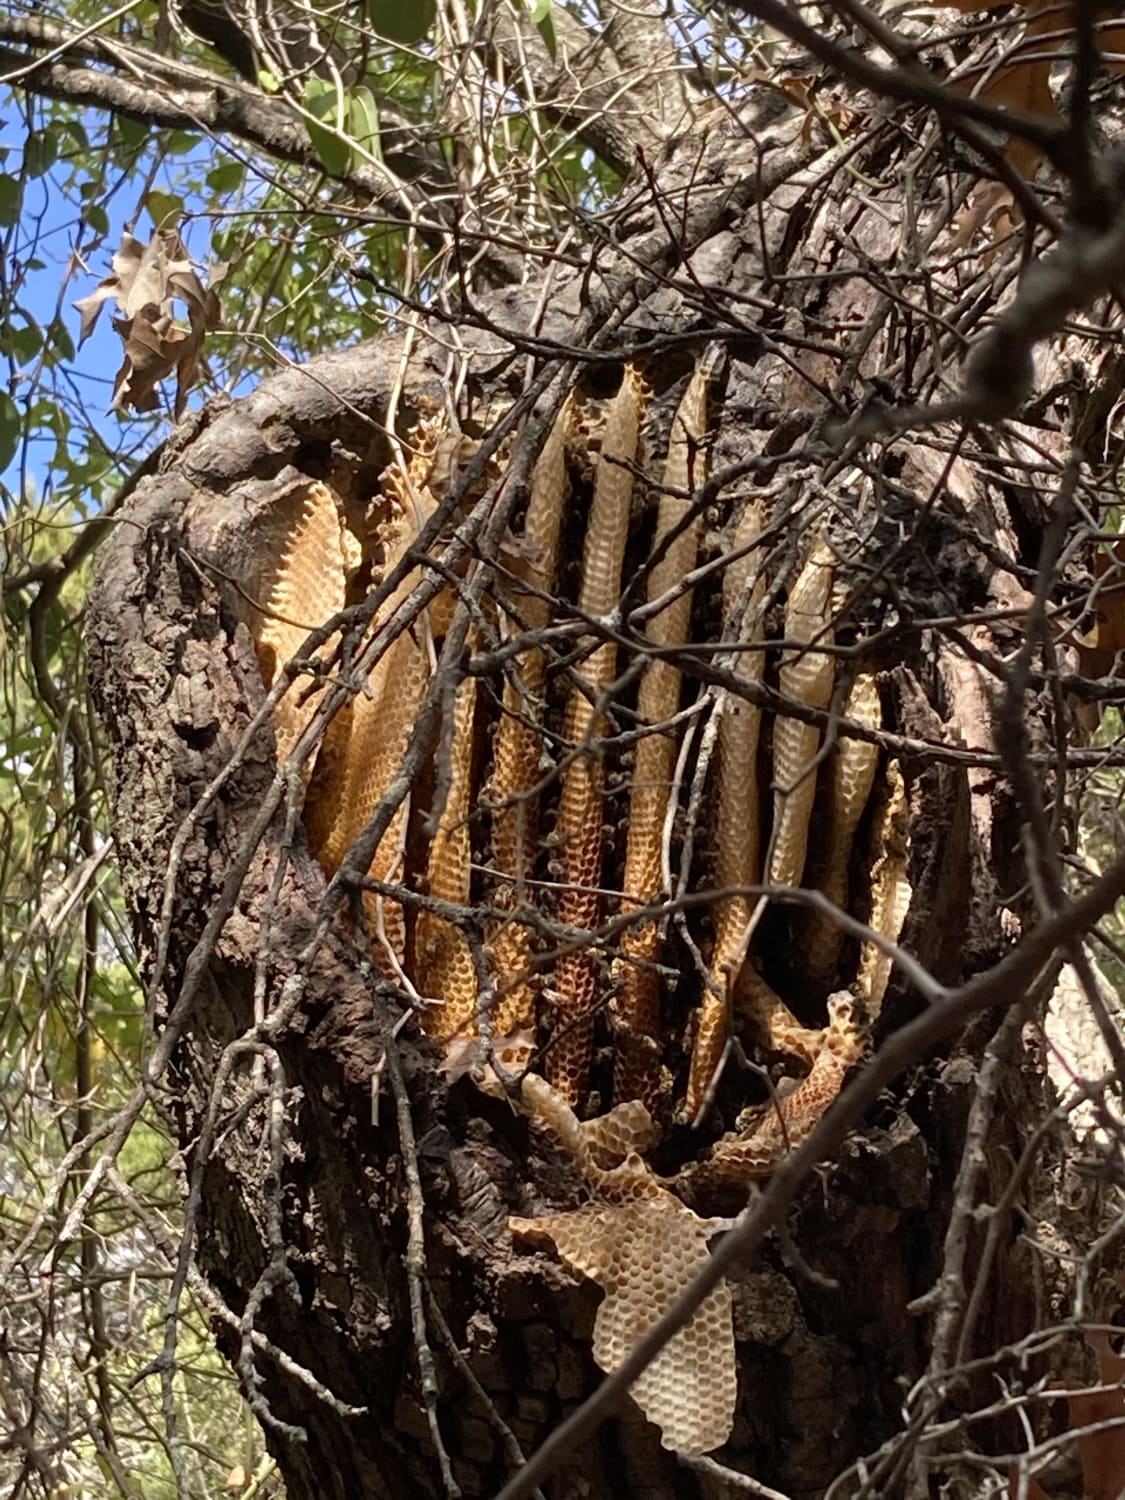 A beehive inside of a tree that I saw this morning while hiking!